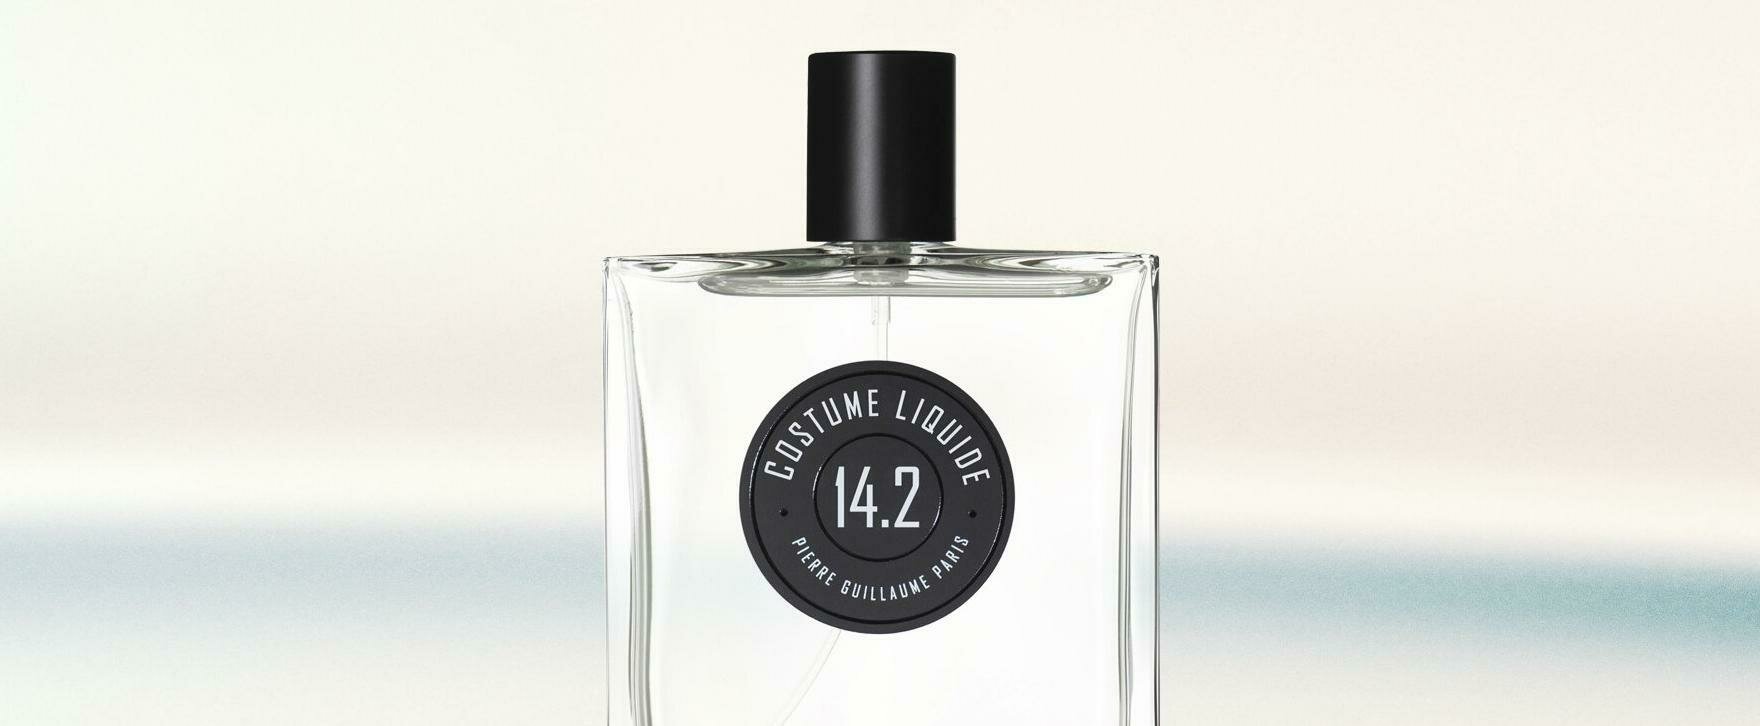 “14.2 Costume Liquide”: The New Creation of the Iris Fragrance Series by Pierre Guillaume